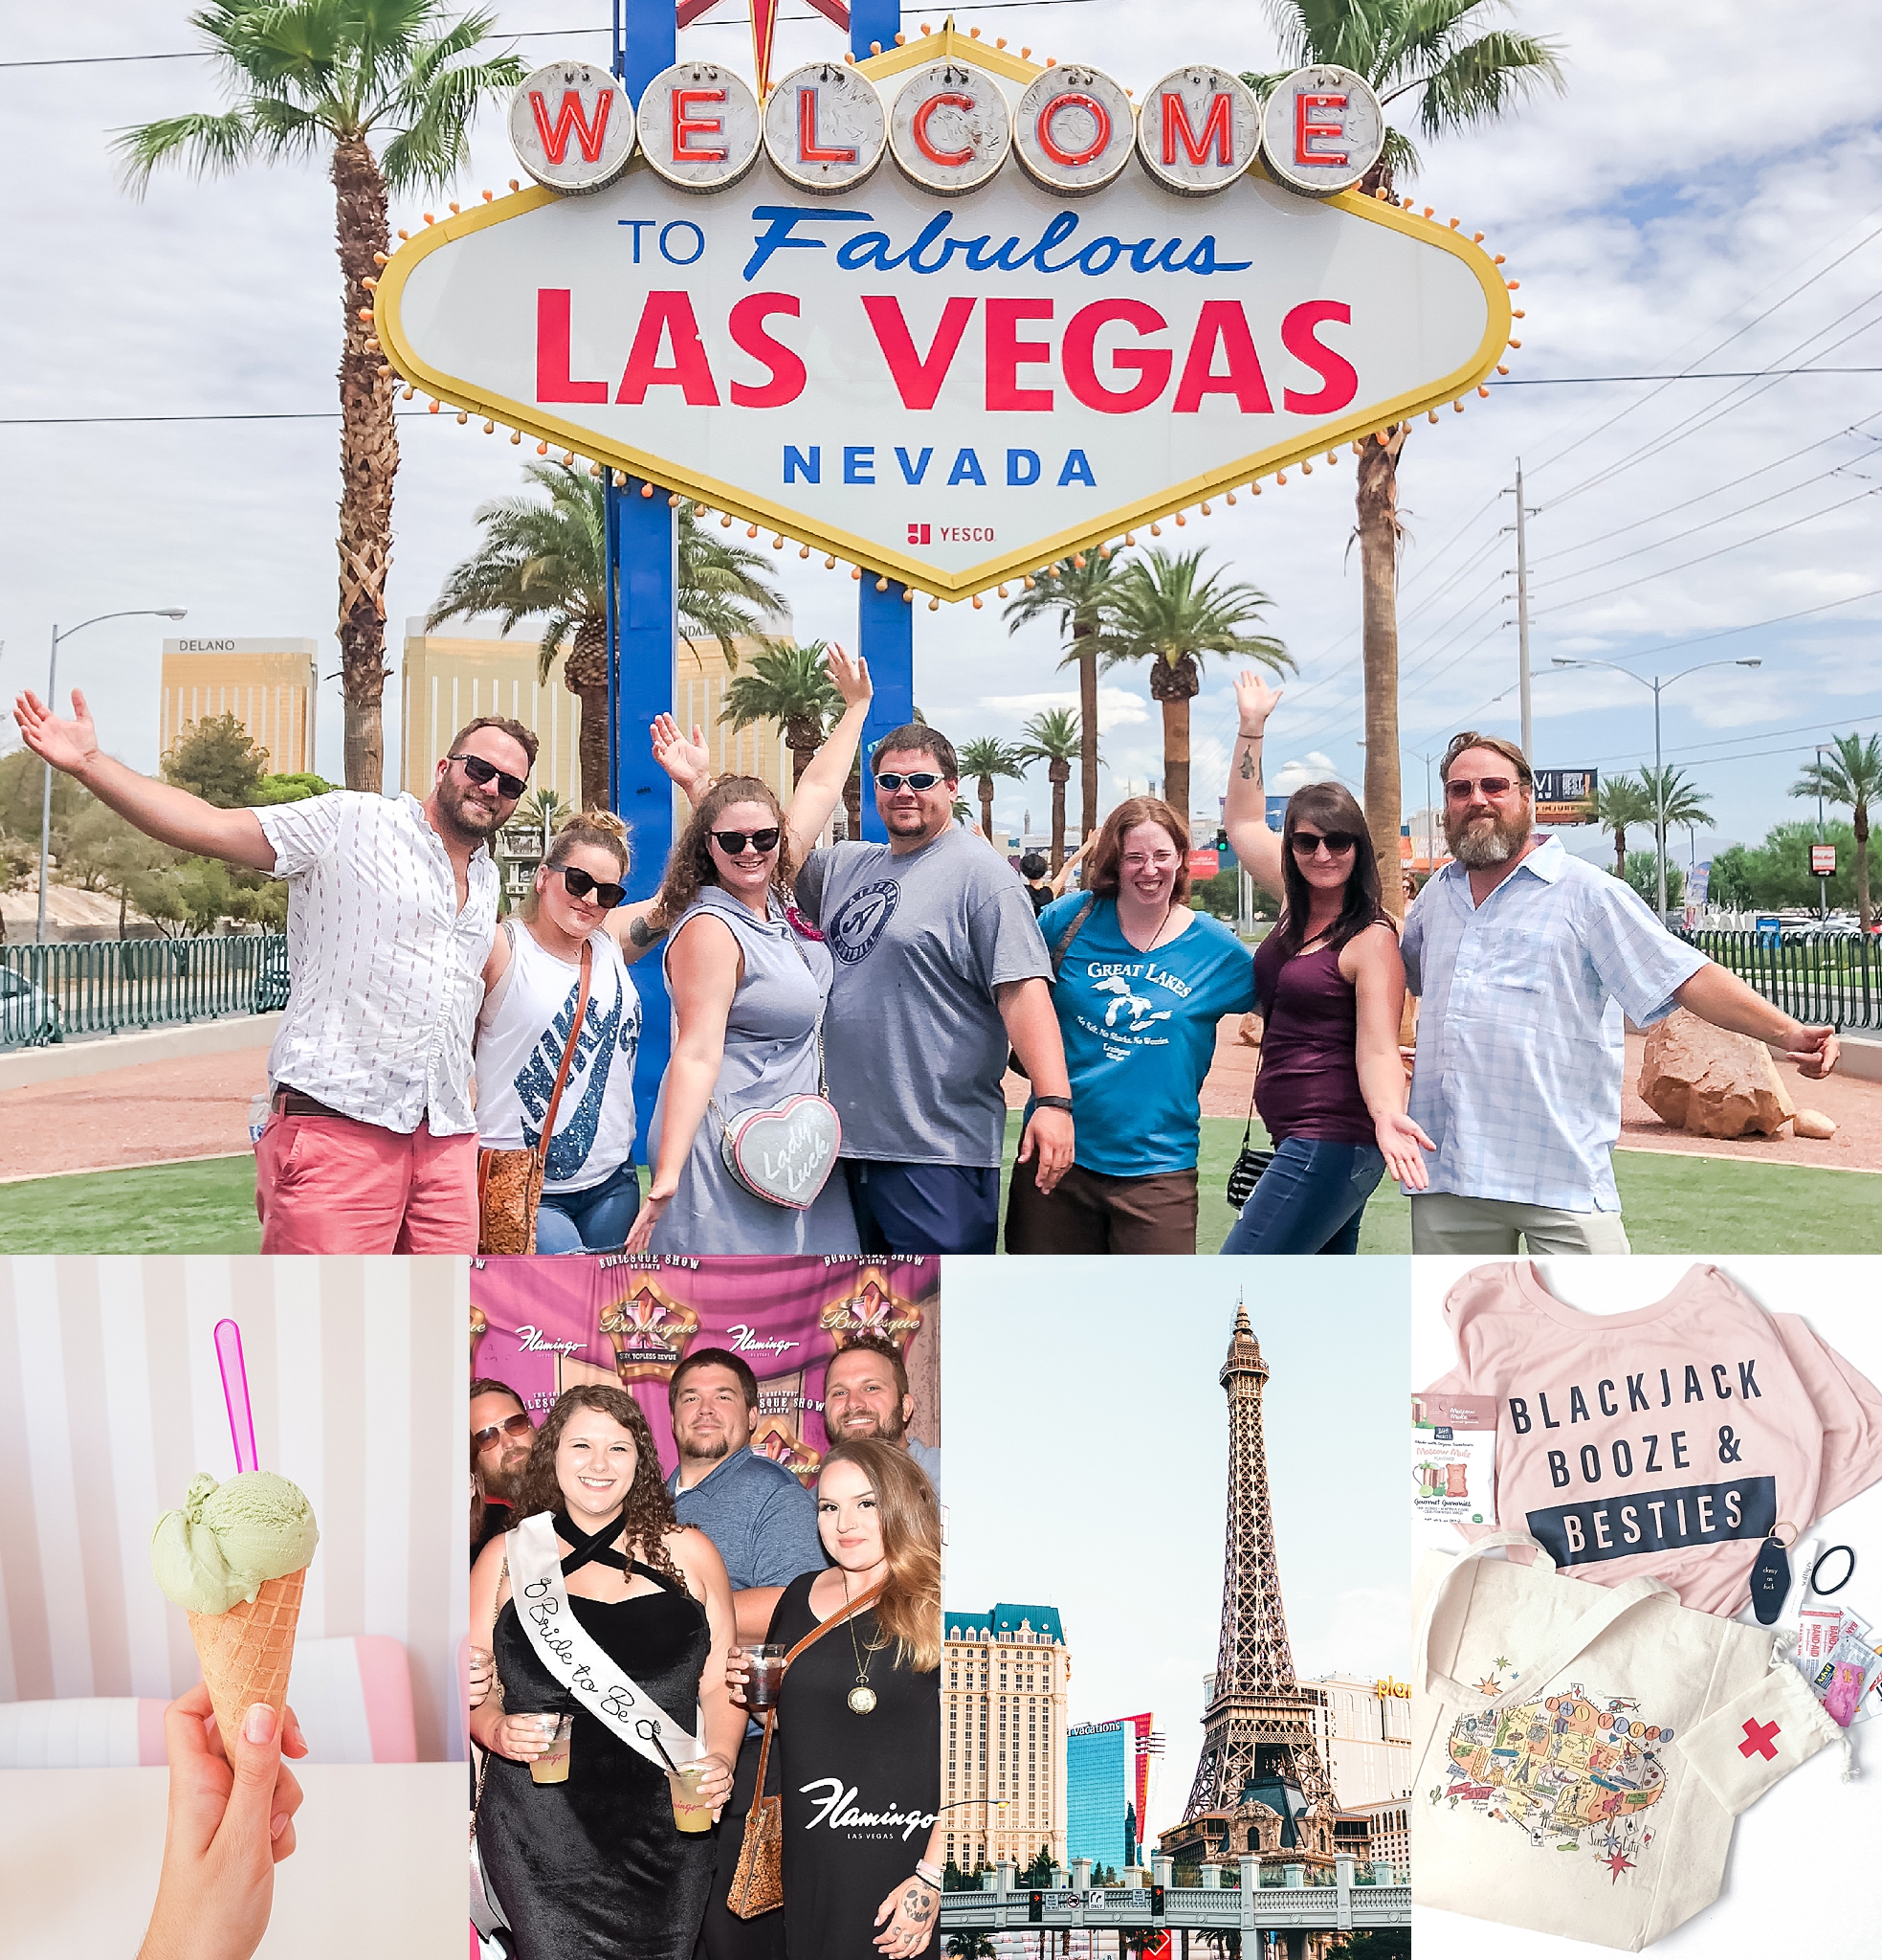 My Overnight Trip to Las Vegas Had Lots of Ups and Downs